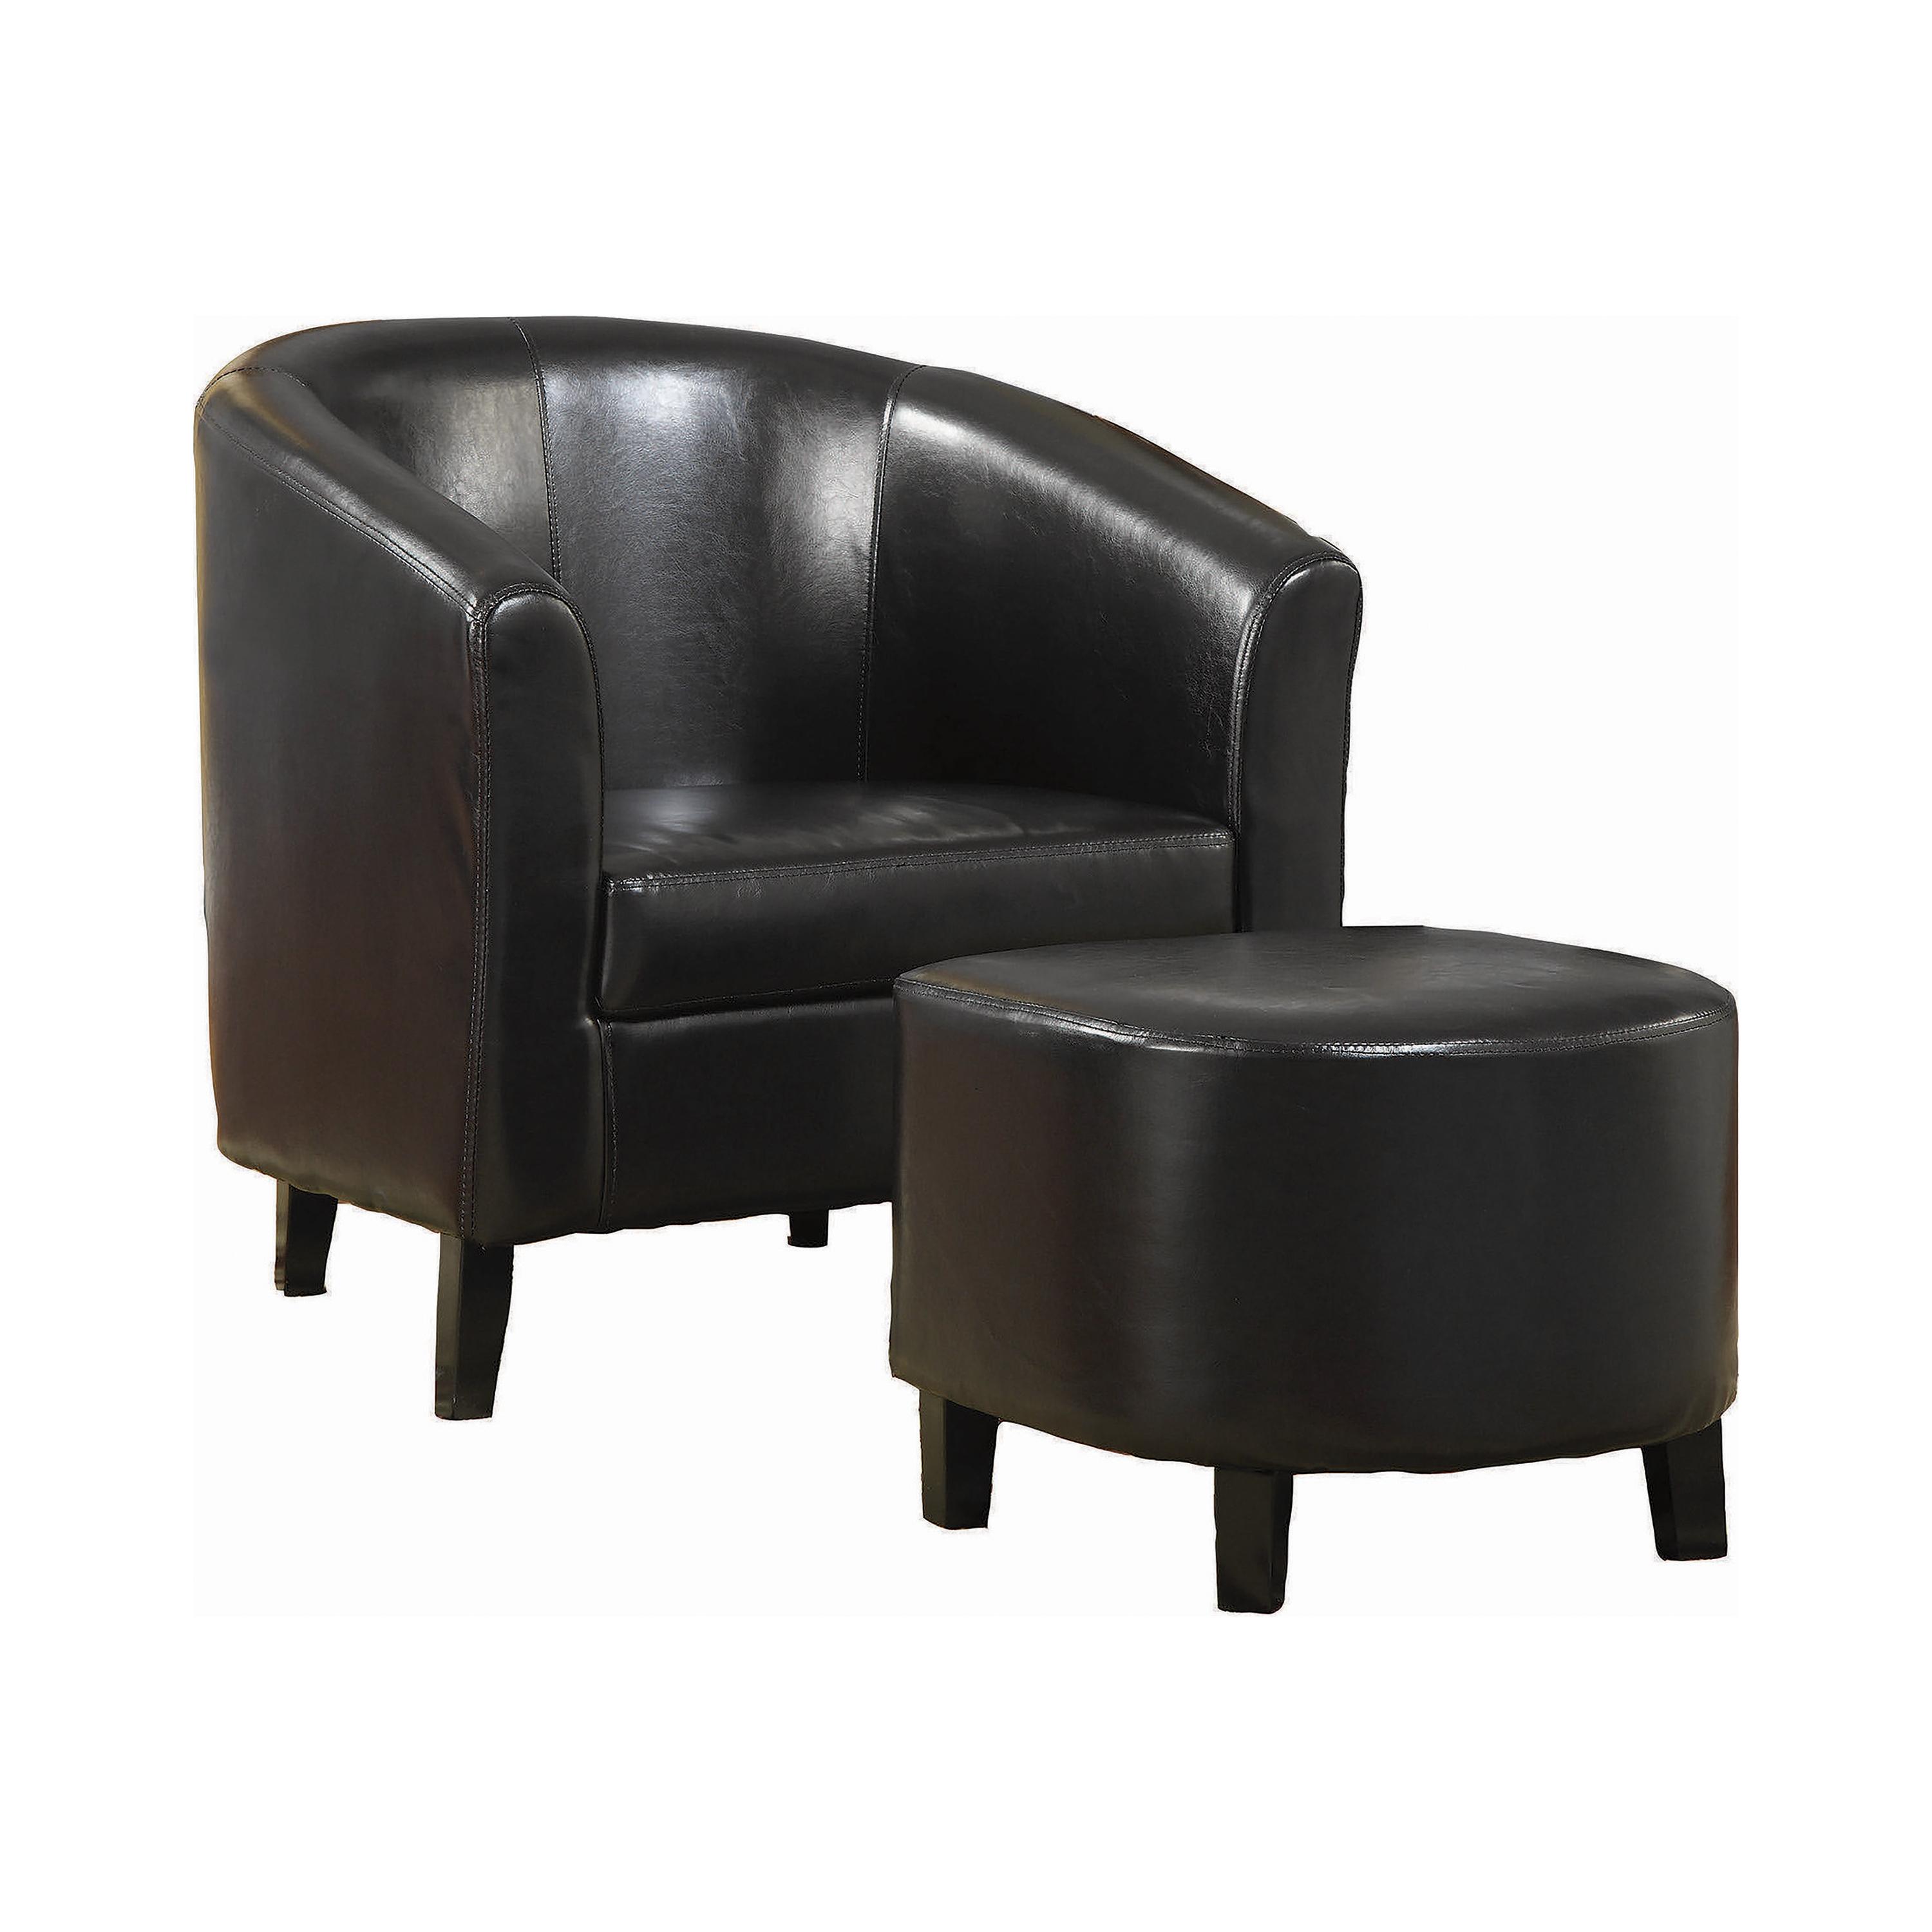 Modern Accent Chair and Ottoman 900240 900240 in Dark Brown Leatherette